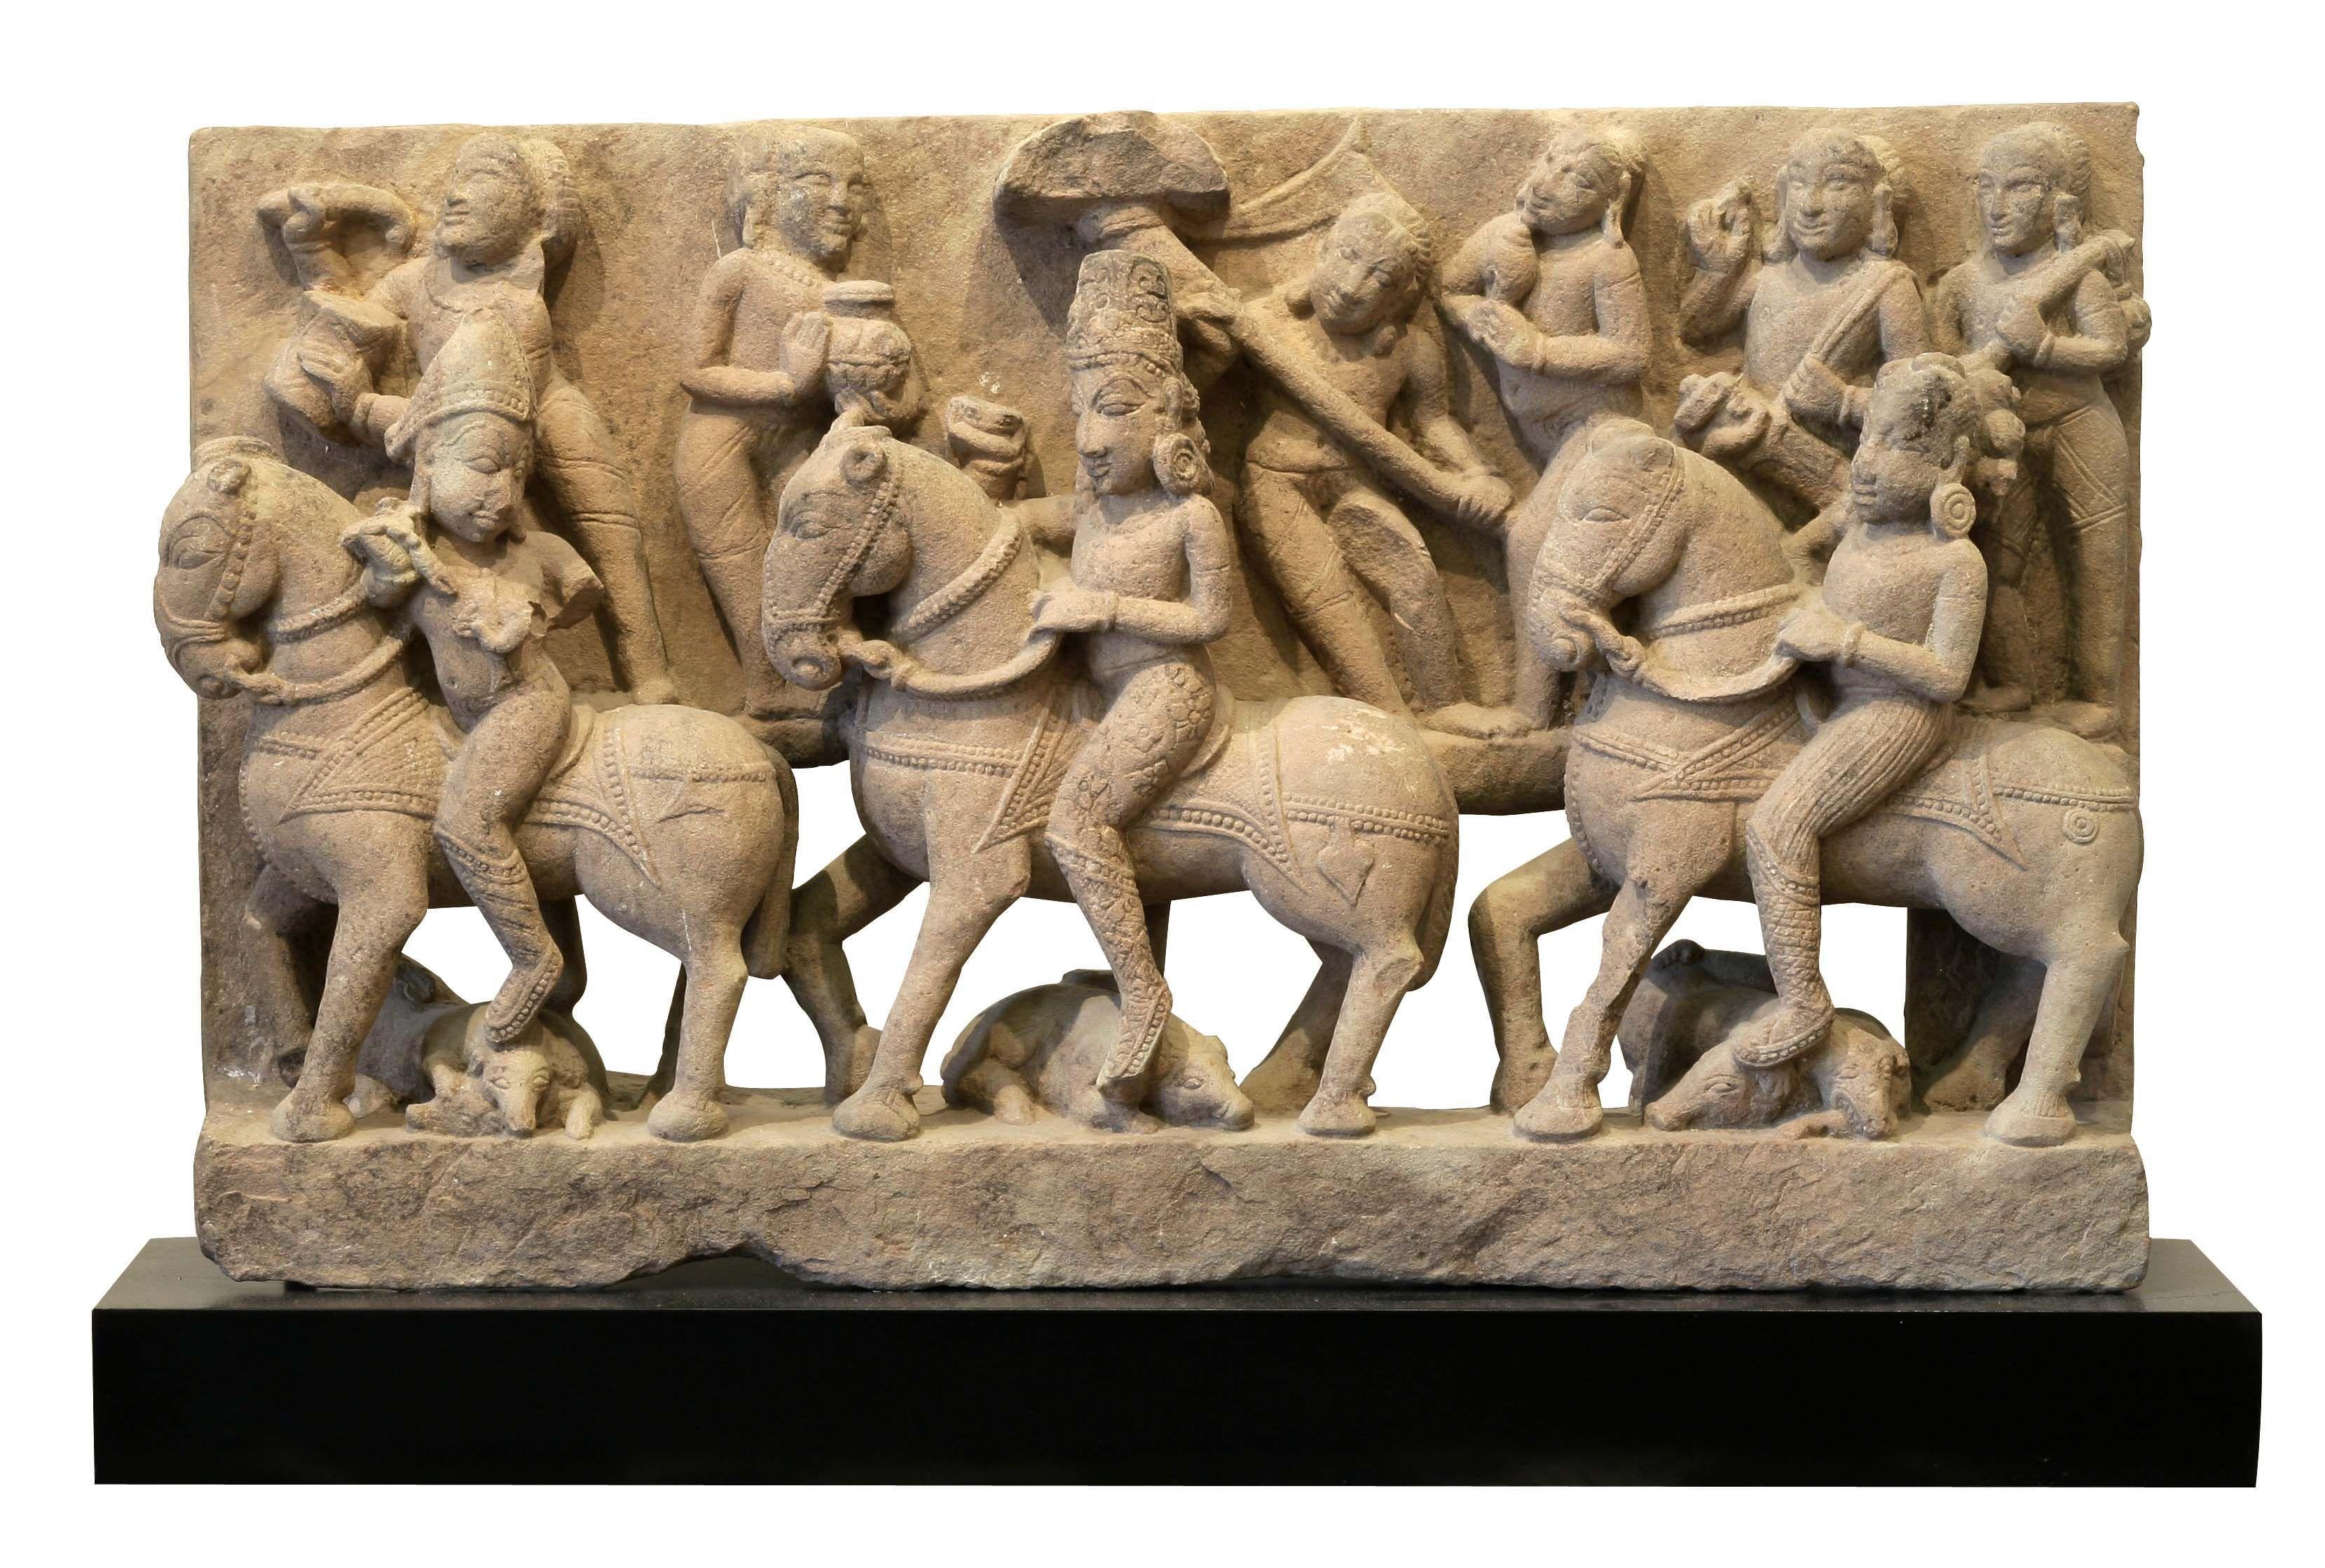 Unknown Figurative Sculpture - Procession with Horses, India, 12th Century